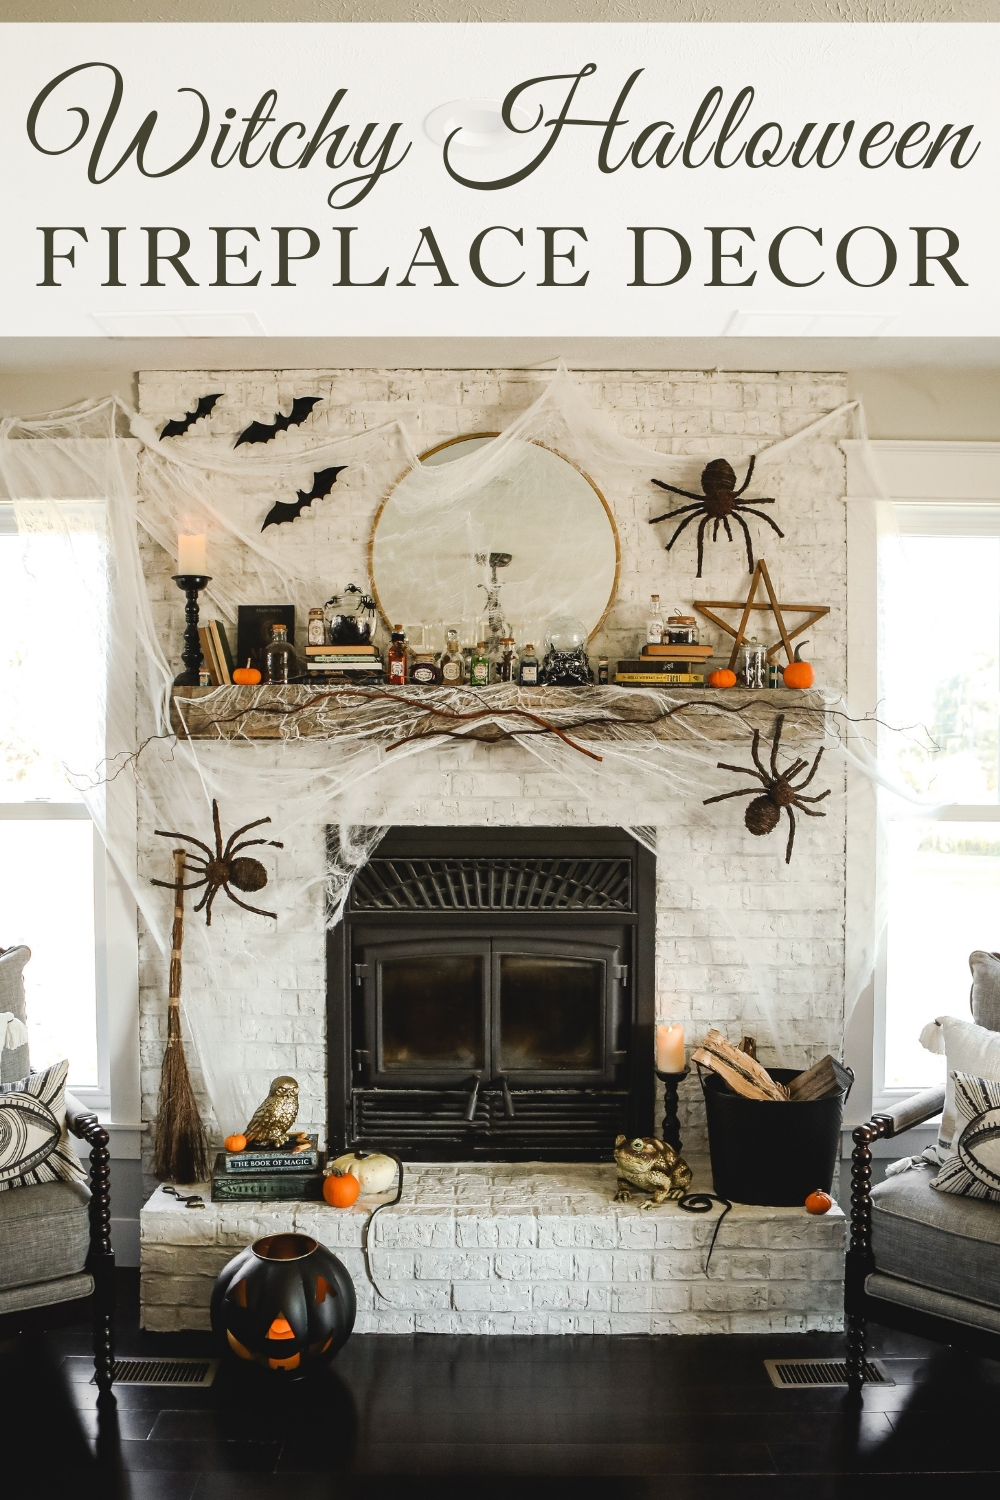 Witchy Halloween Fireplace Decor